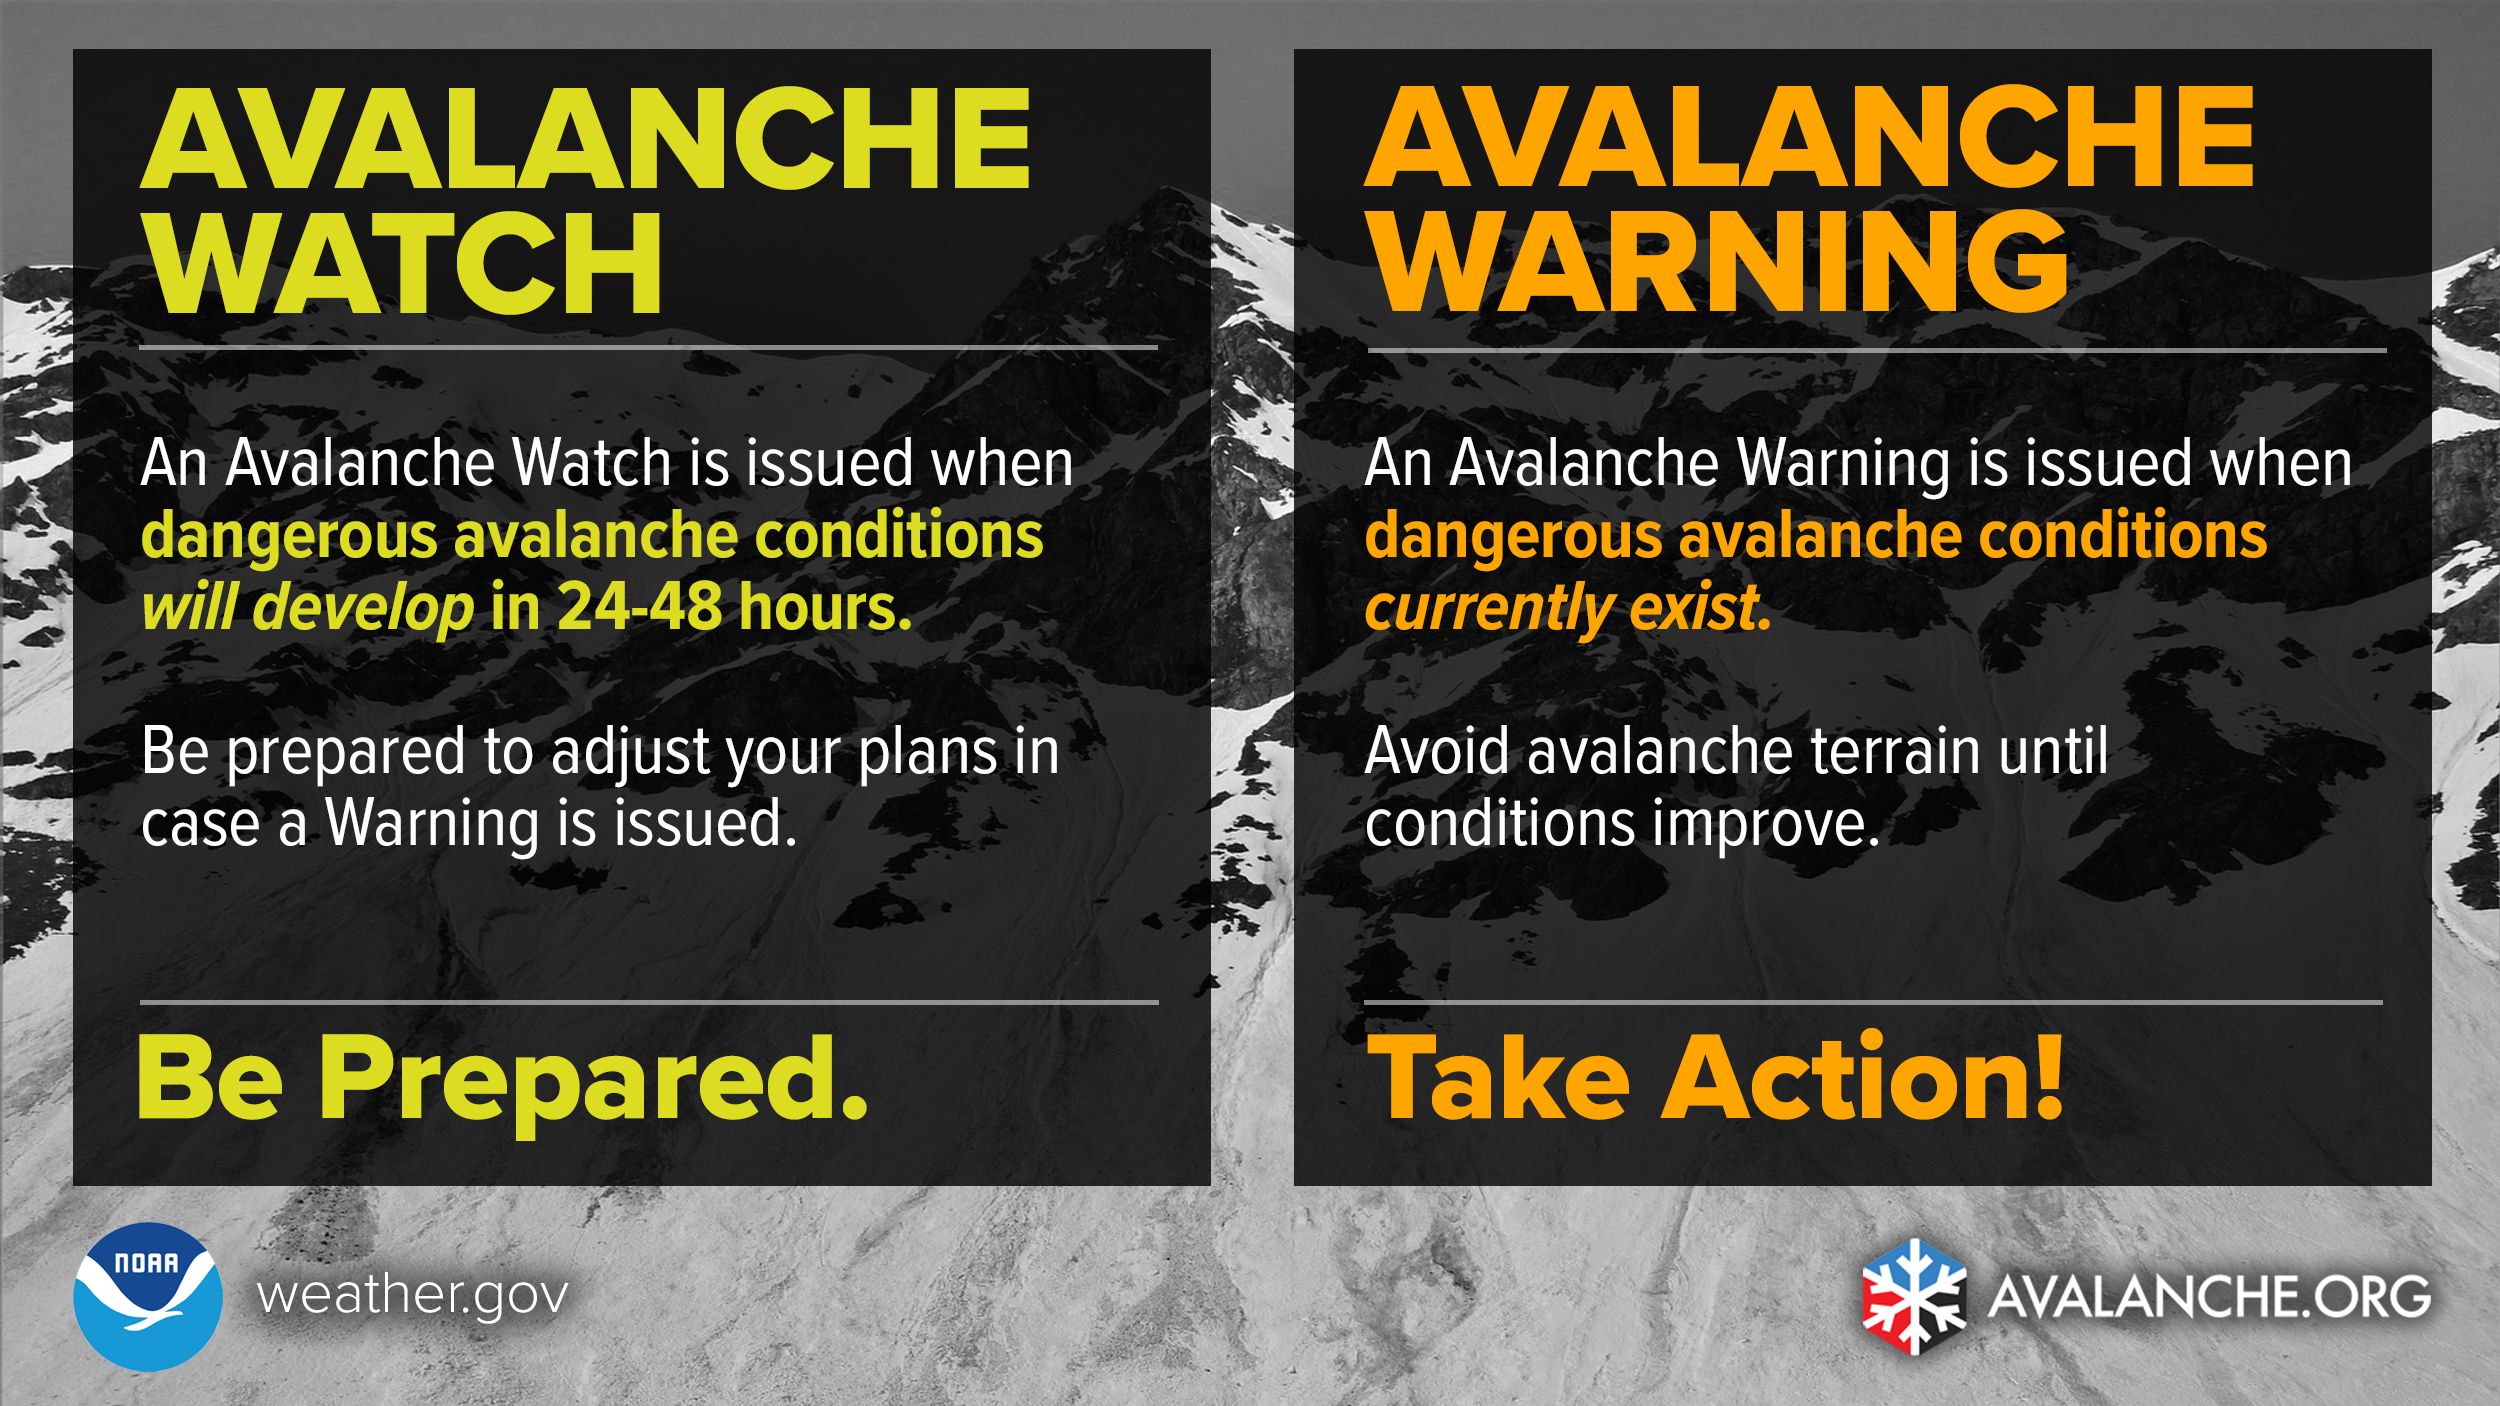 Image describing avalanche watches and avalanche warnings.